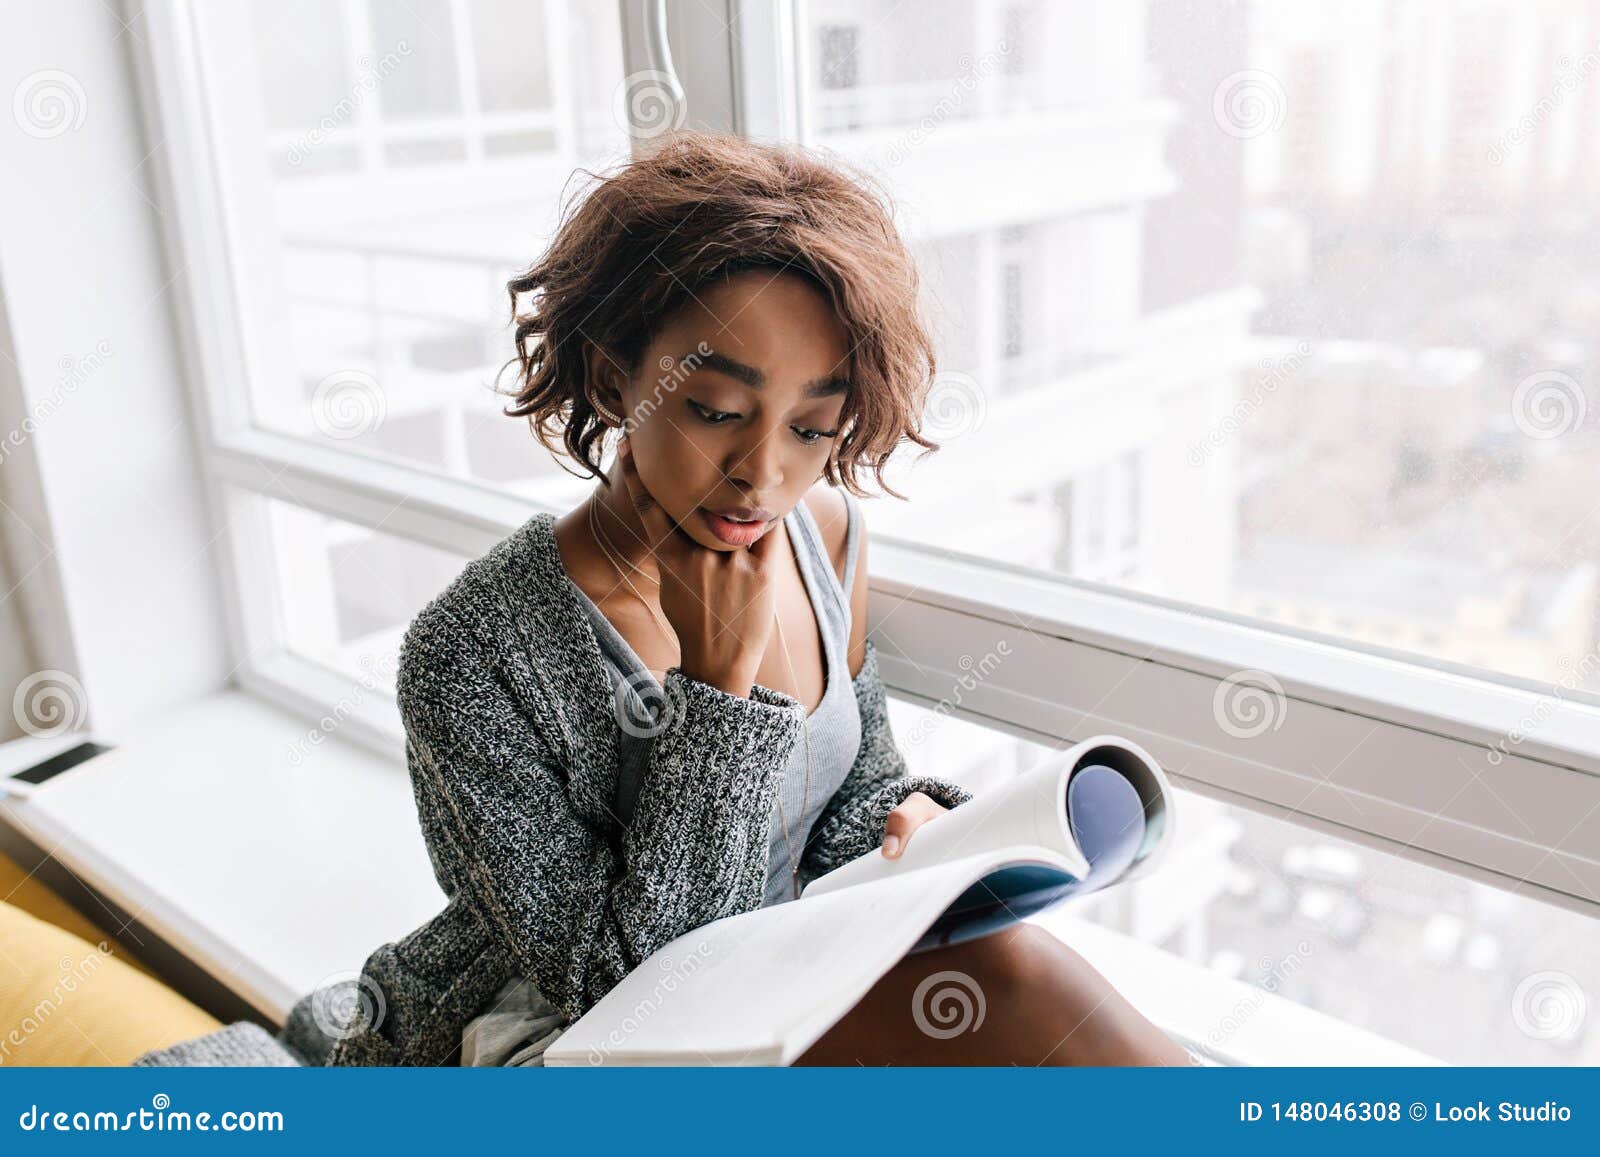 Adorable Young Girl With Short Curly Hair Absorbedly Reading